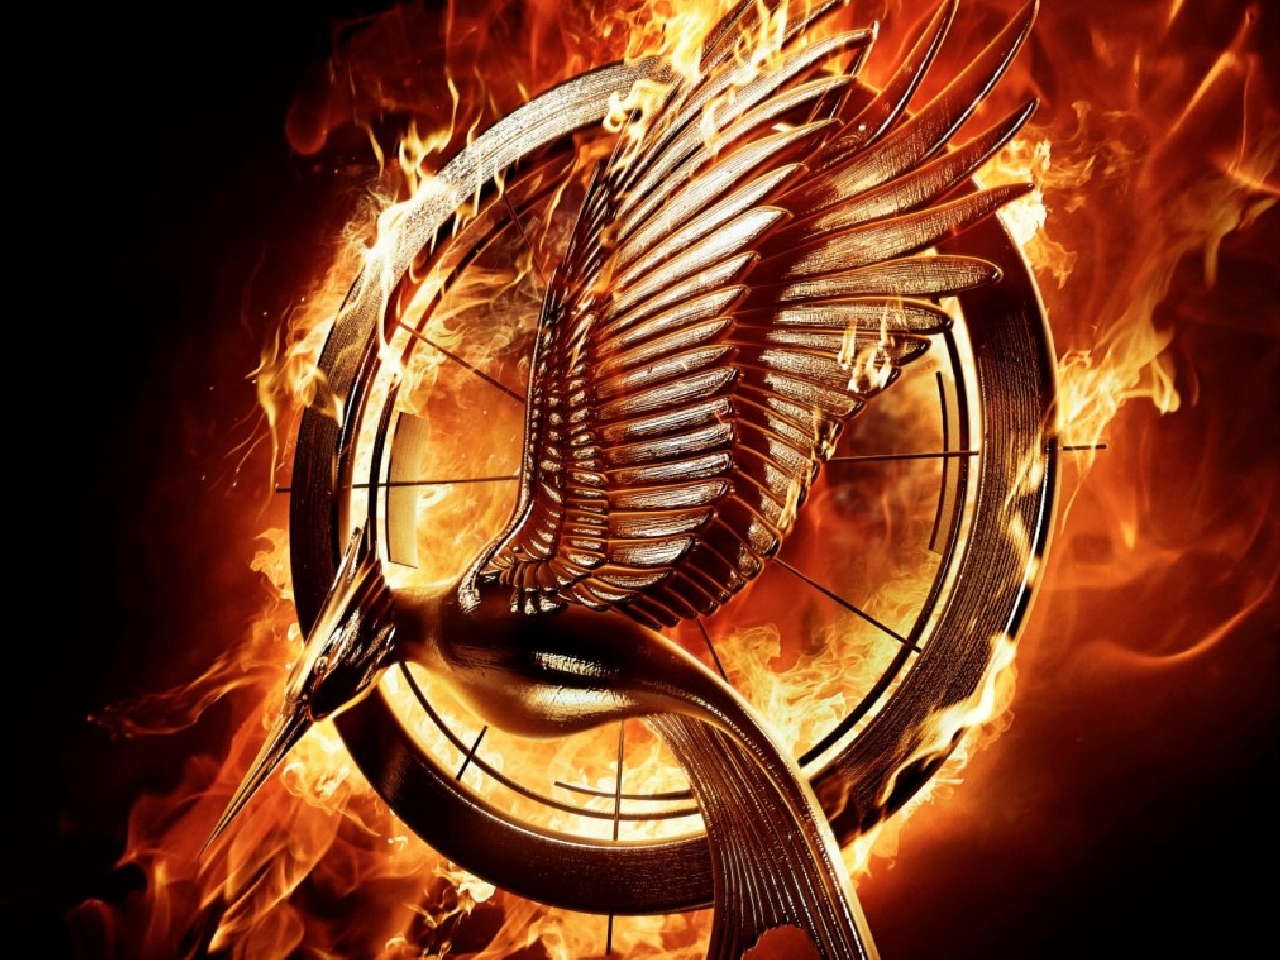 Movie News: The Hunger Games sequel gets a very nice poster